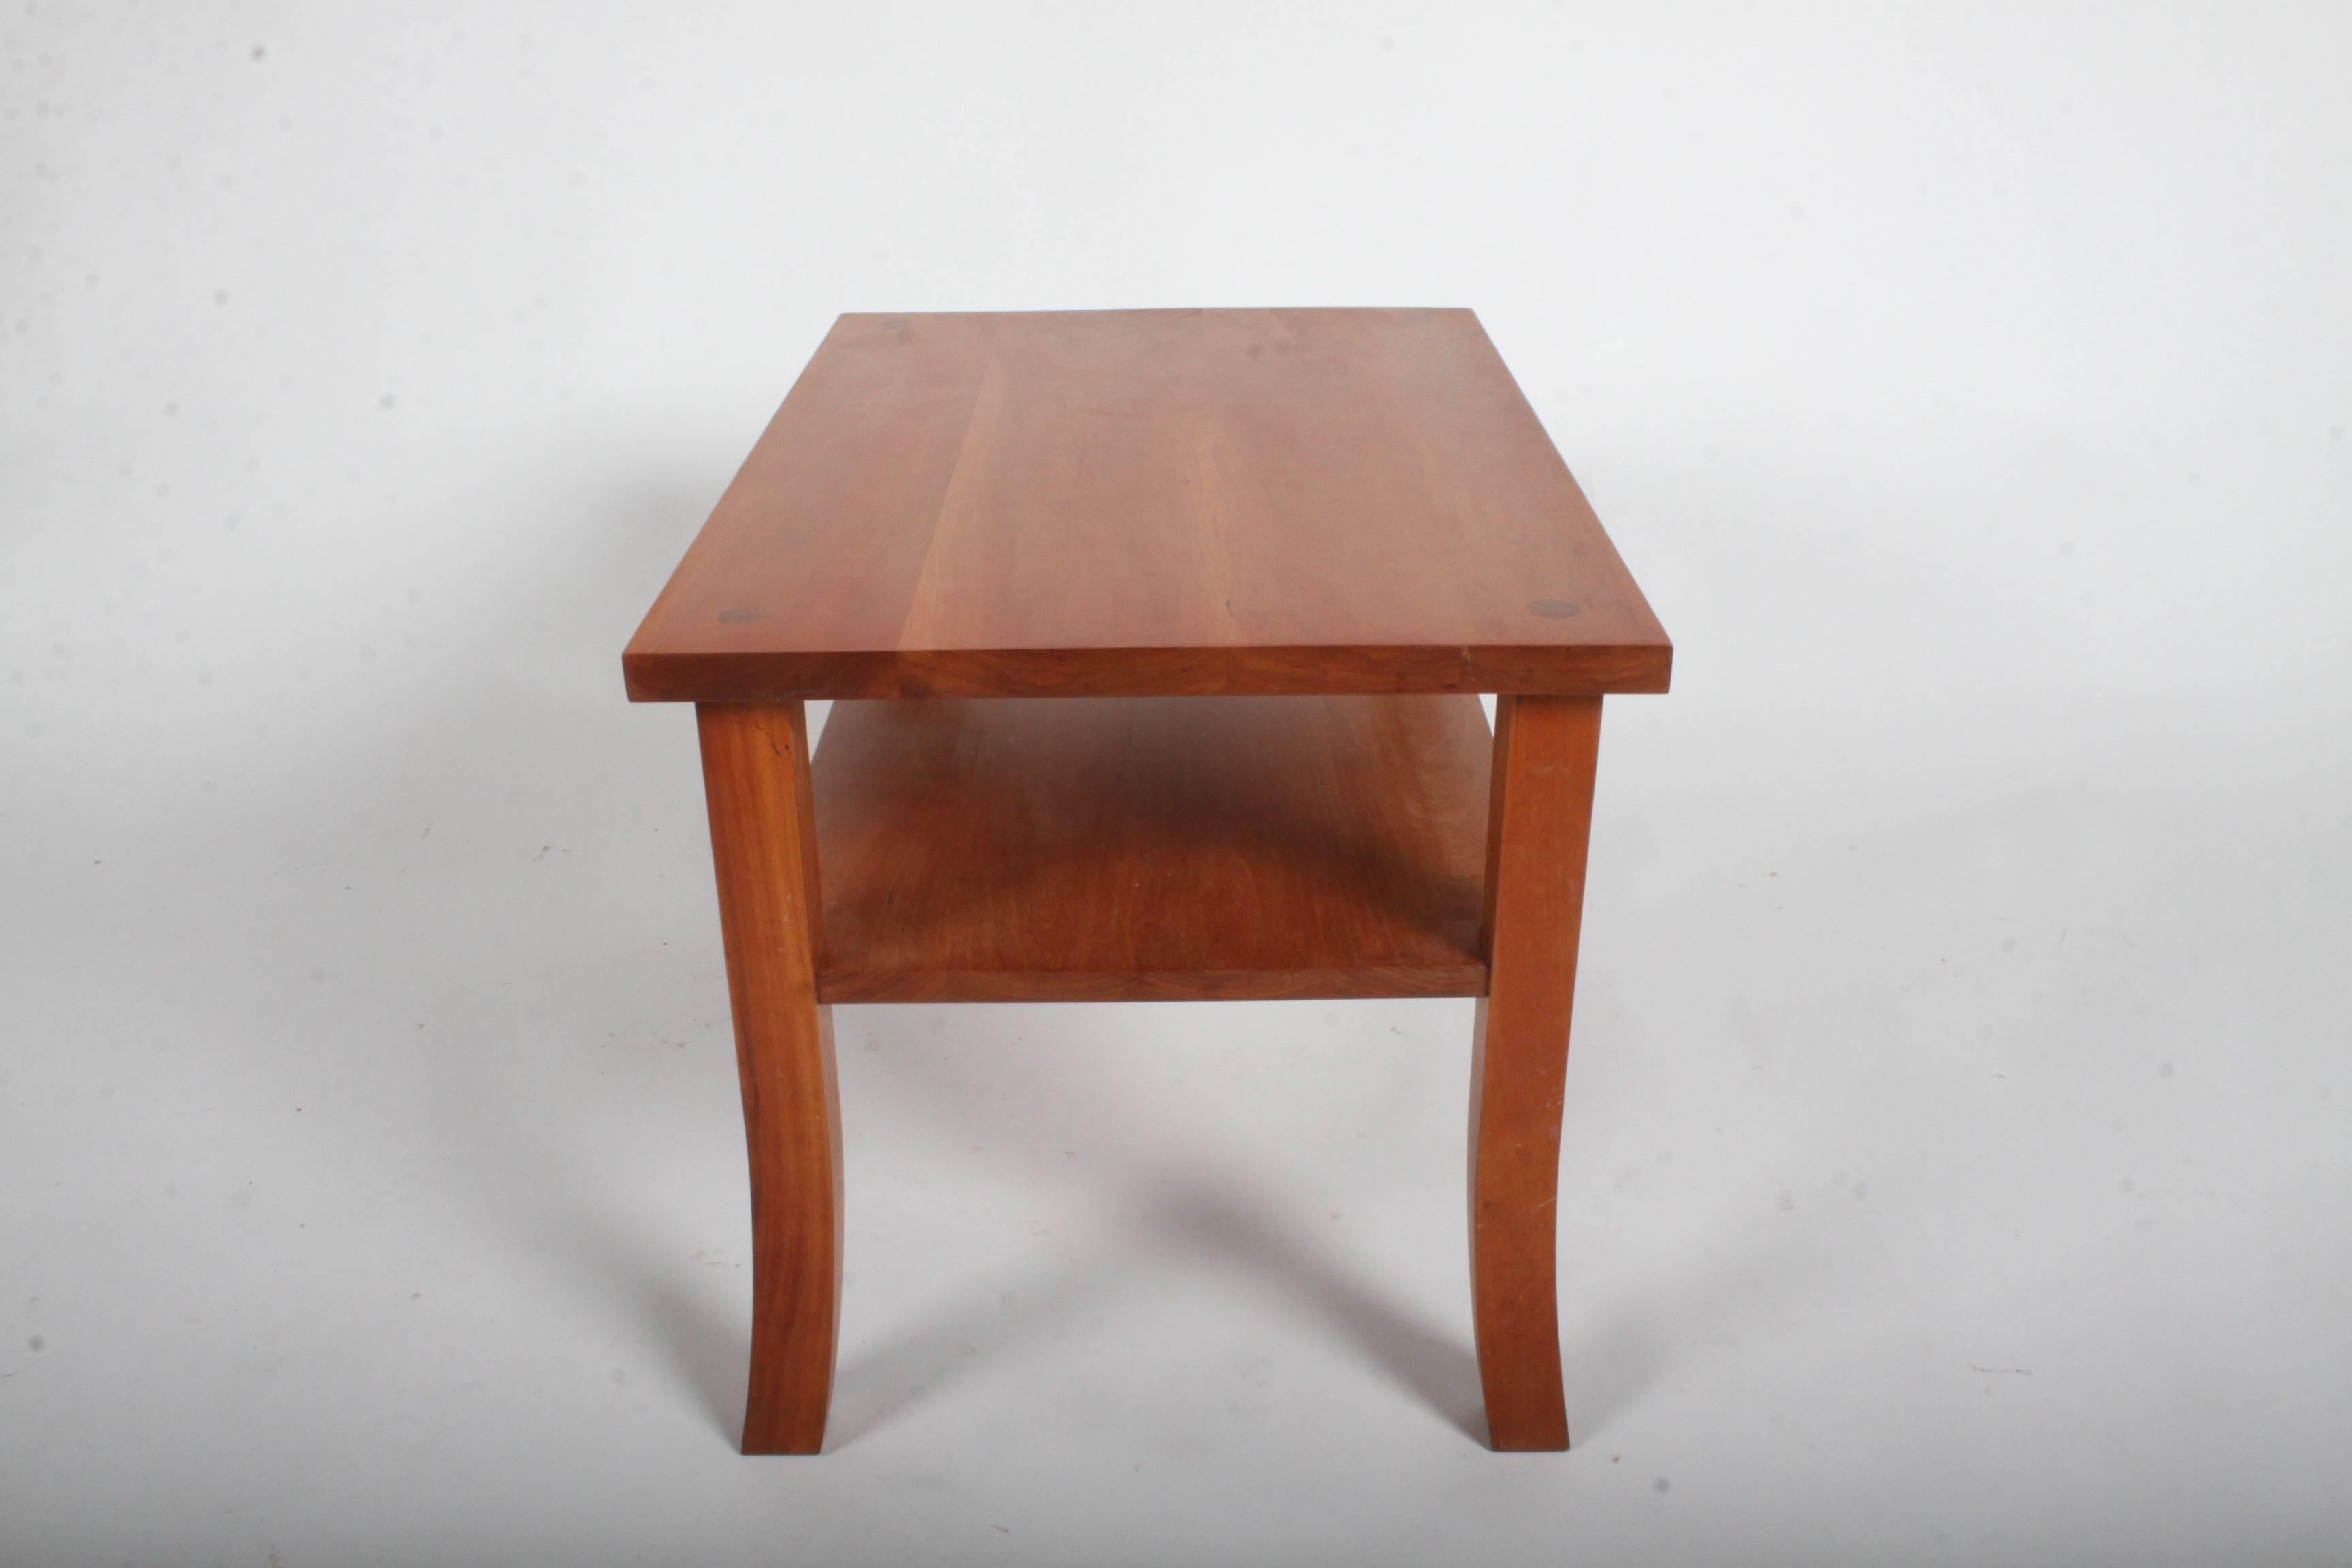 Contemporary Signed Thomas Moser Lolling Side Table in Cherry